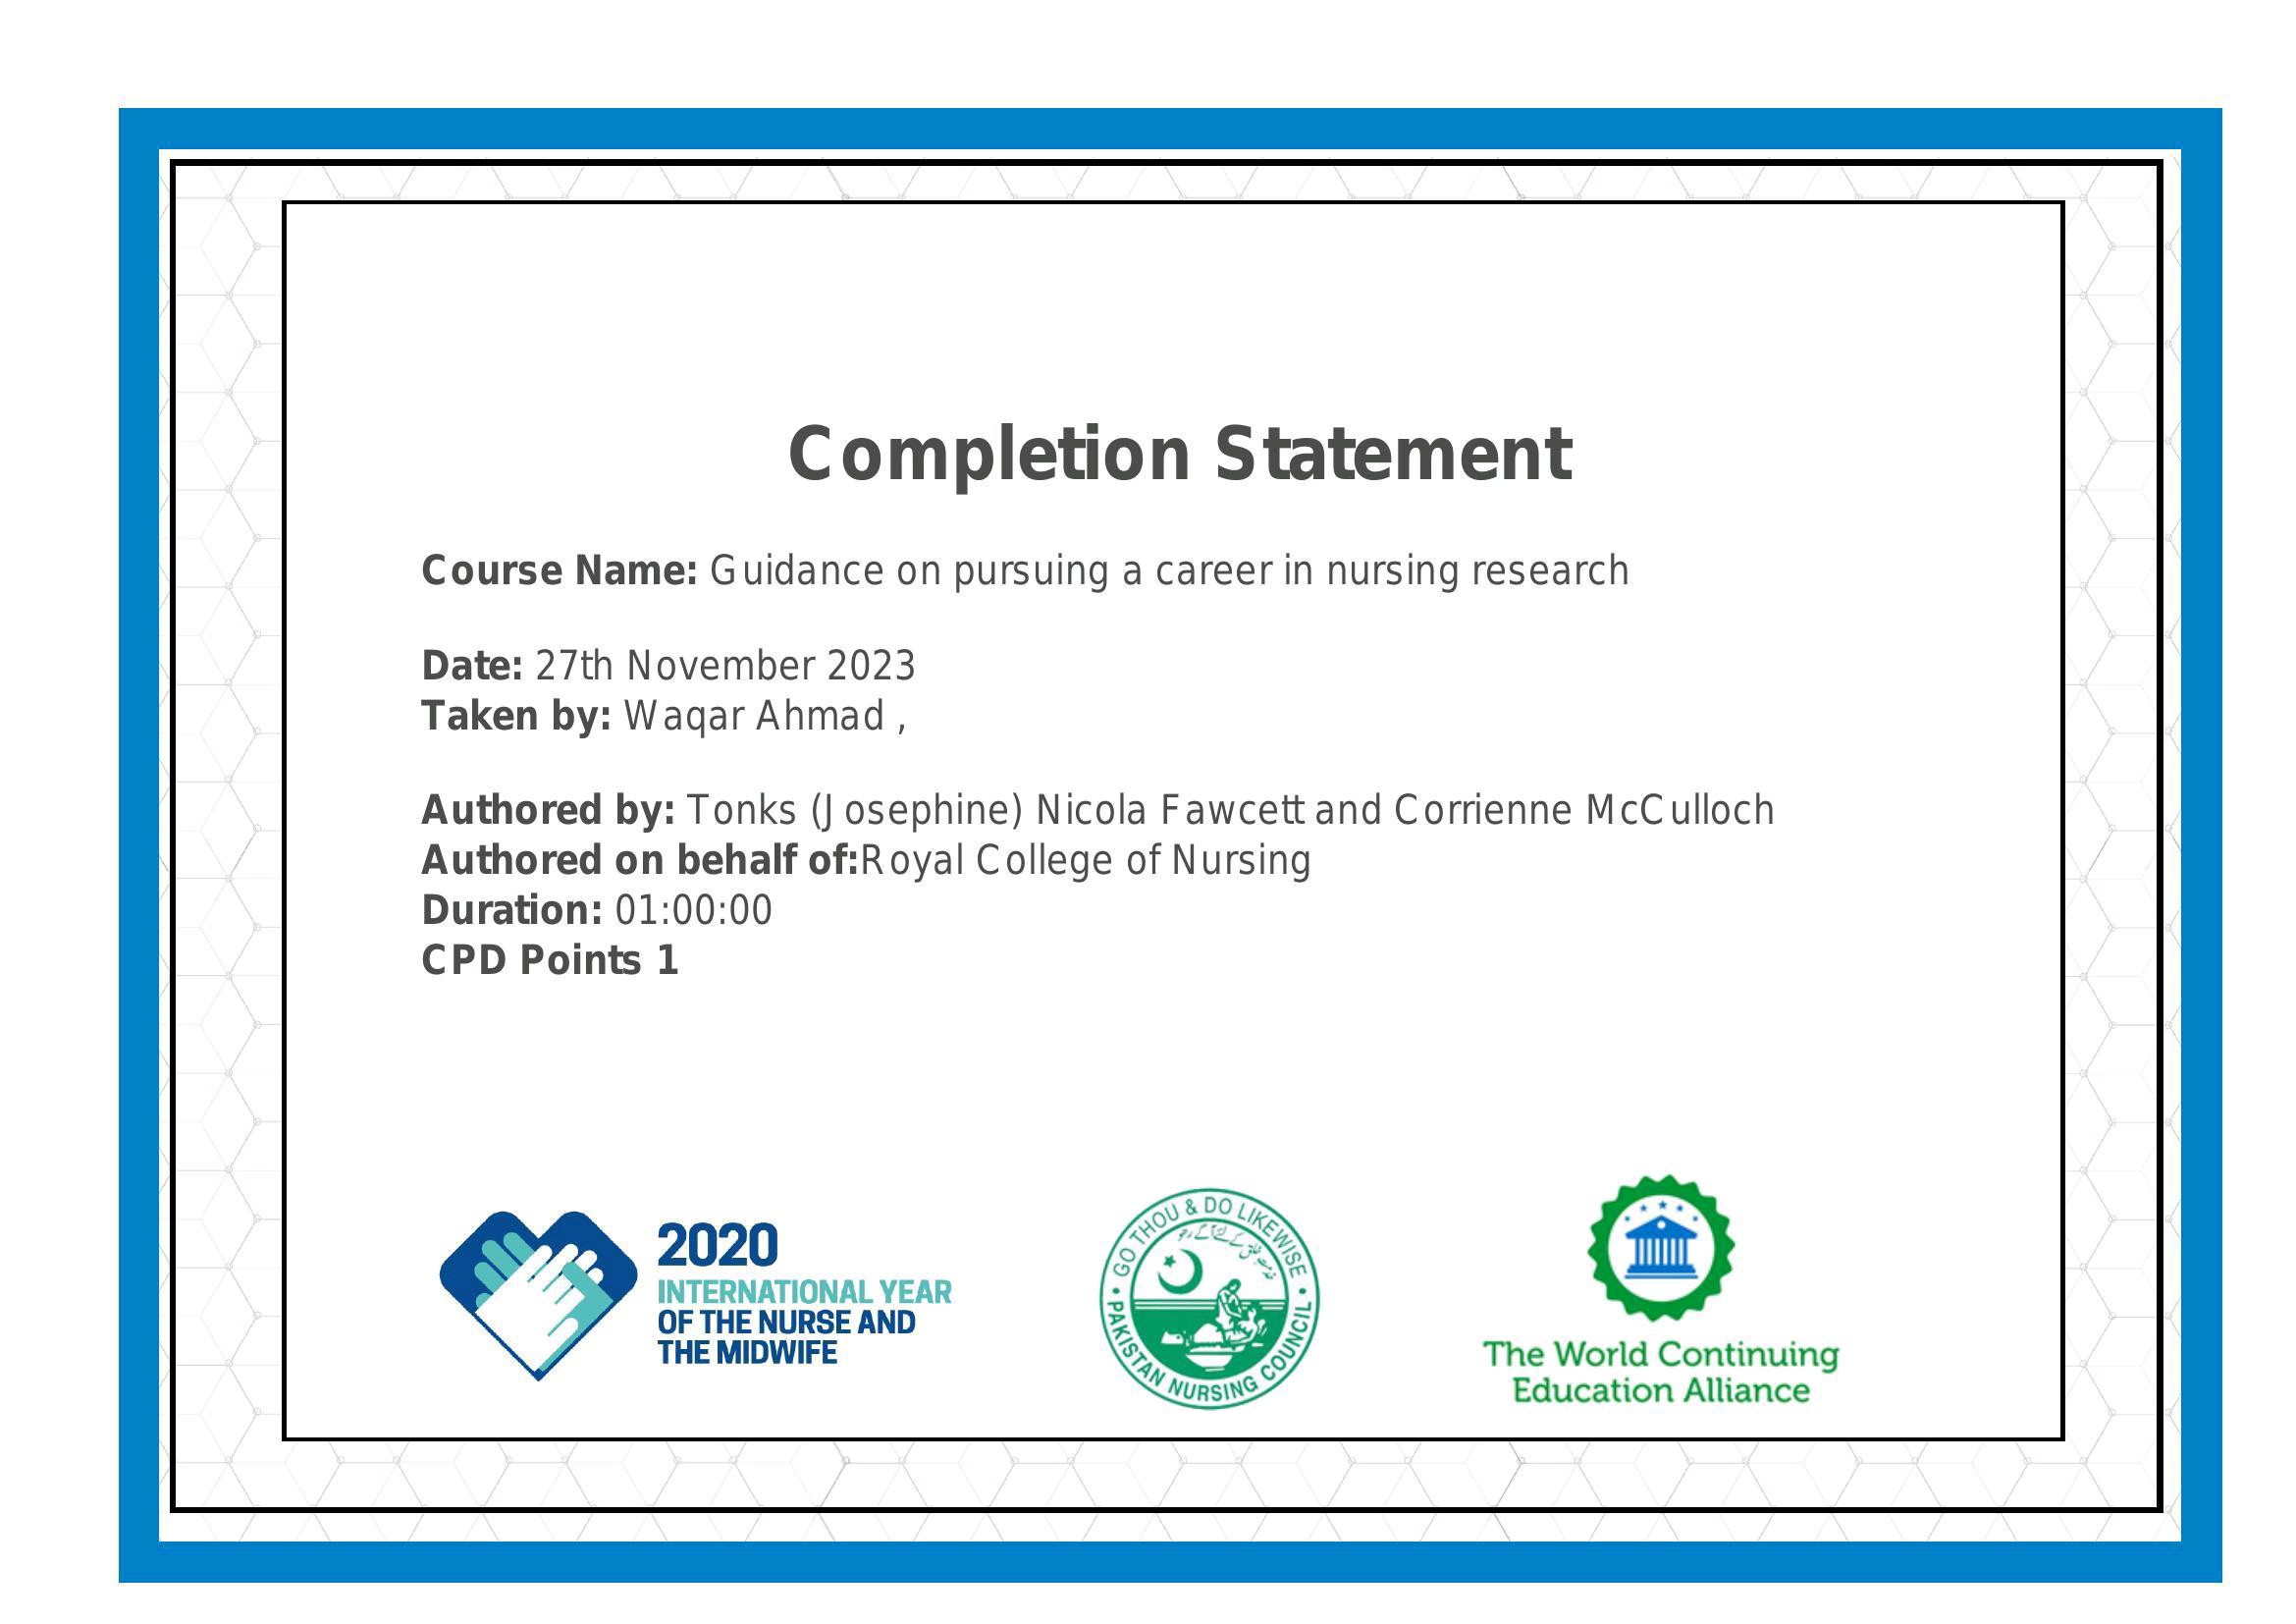 Completion Statement

Course Name: Guidance on pursuing a career in nursing research

Date: 27th November 2023
Taken by: Wagar Ahmad ,

Authored by: Tonks (J osephine) Nicola Fawcett and Corrienne McCulloch
Authored on behalf of:Royal College of Nursing

Duration: 01:00:00

CPD Points 1

INTERNATIONAL YEAR :

OF THE NURSE AND Ry

THE MIDWIFE : The World Continuing
Education Alliance